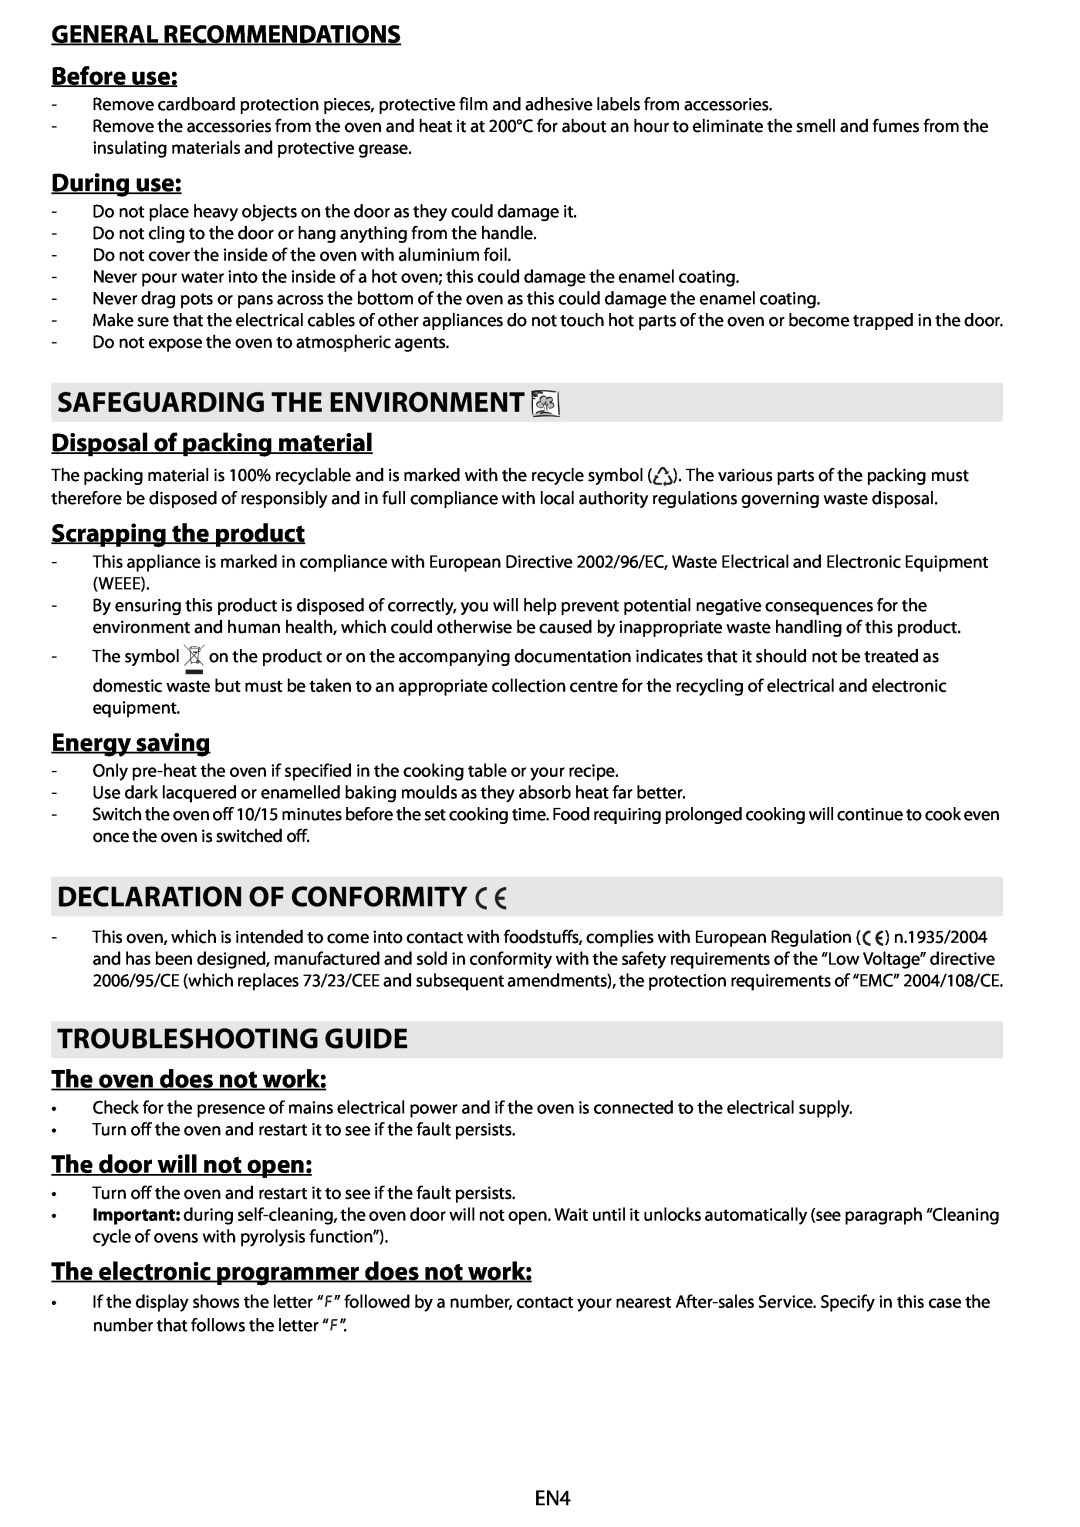 Whirlpool AKZM 6560 manual Safeguarding The Environment, Declaration Of Conformity, Troubleshooting Guide, During use 